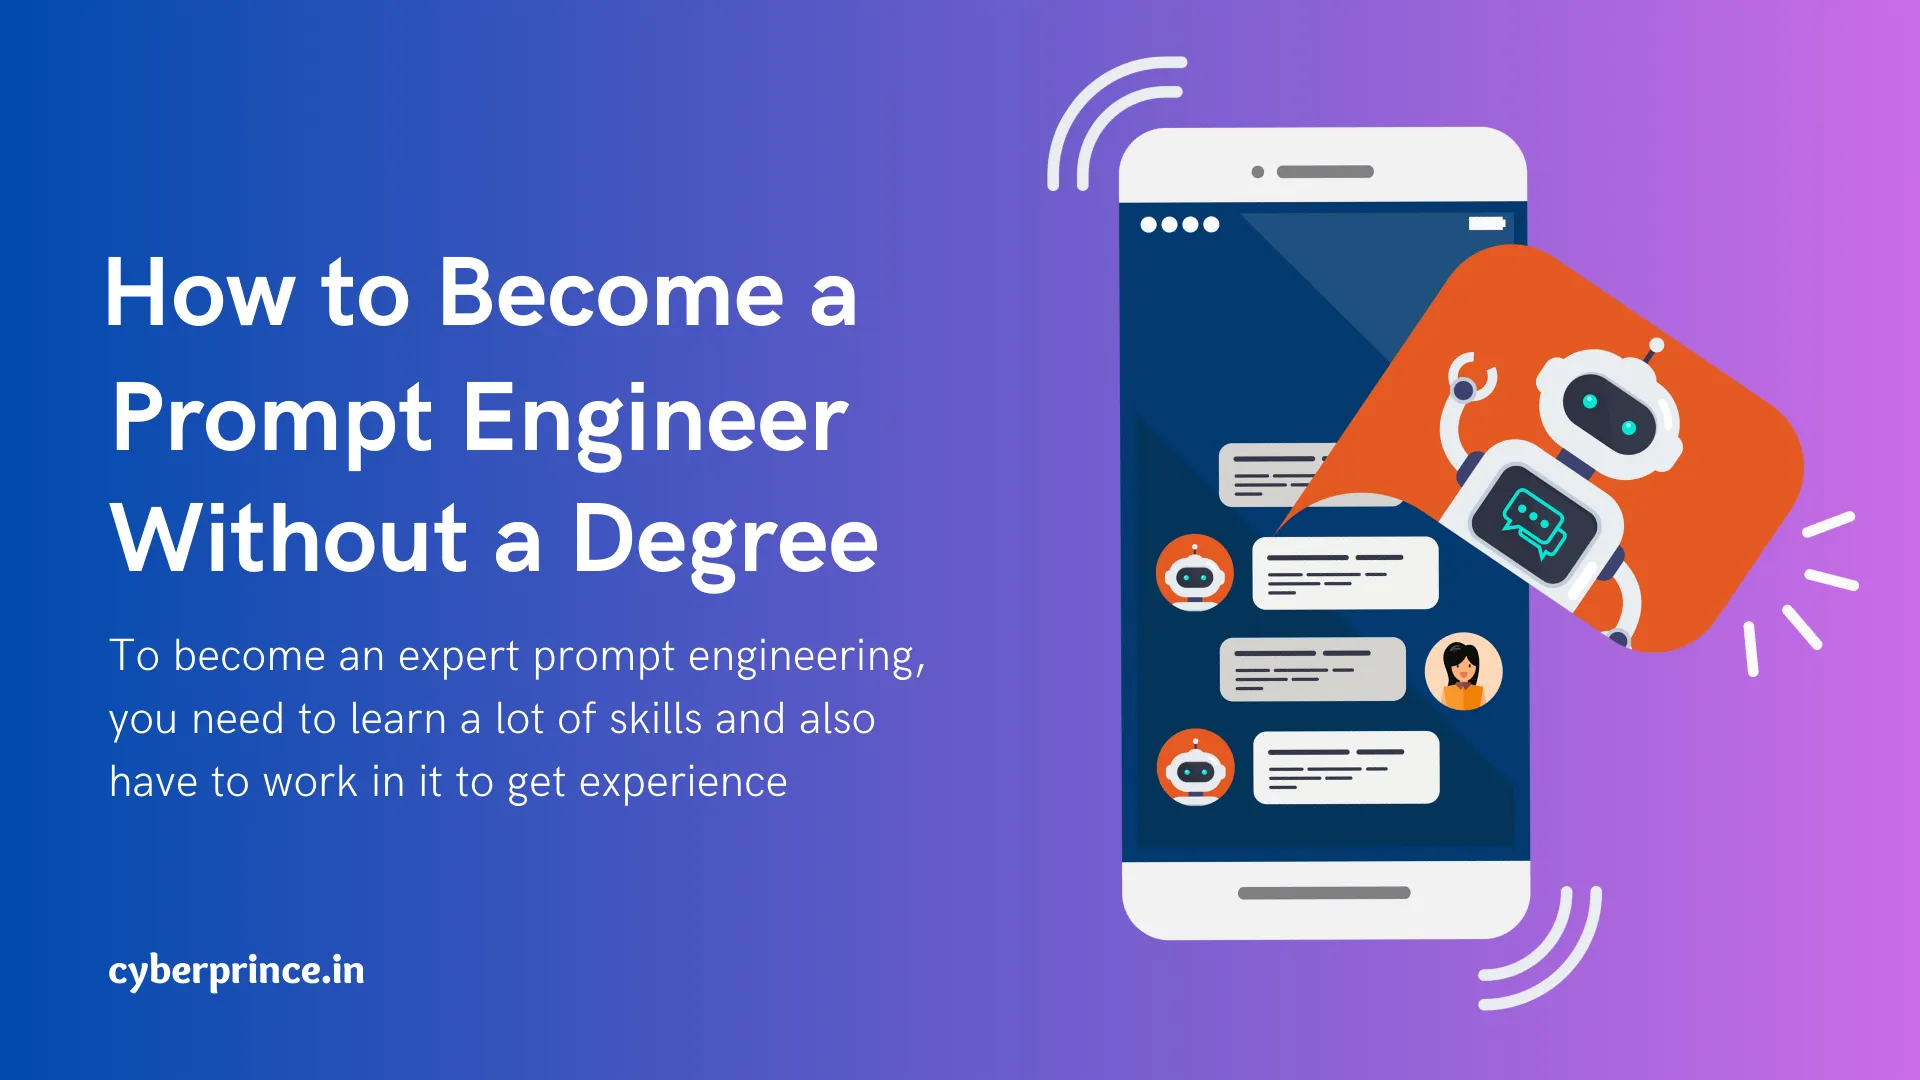 How to Become a Prompt Engineer Without a Degree